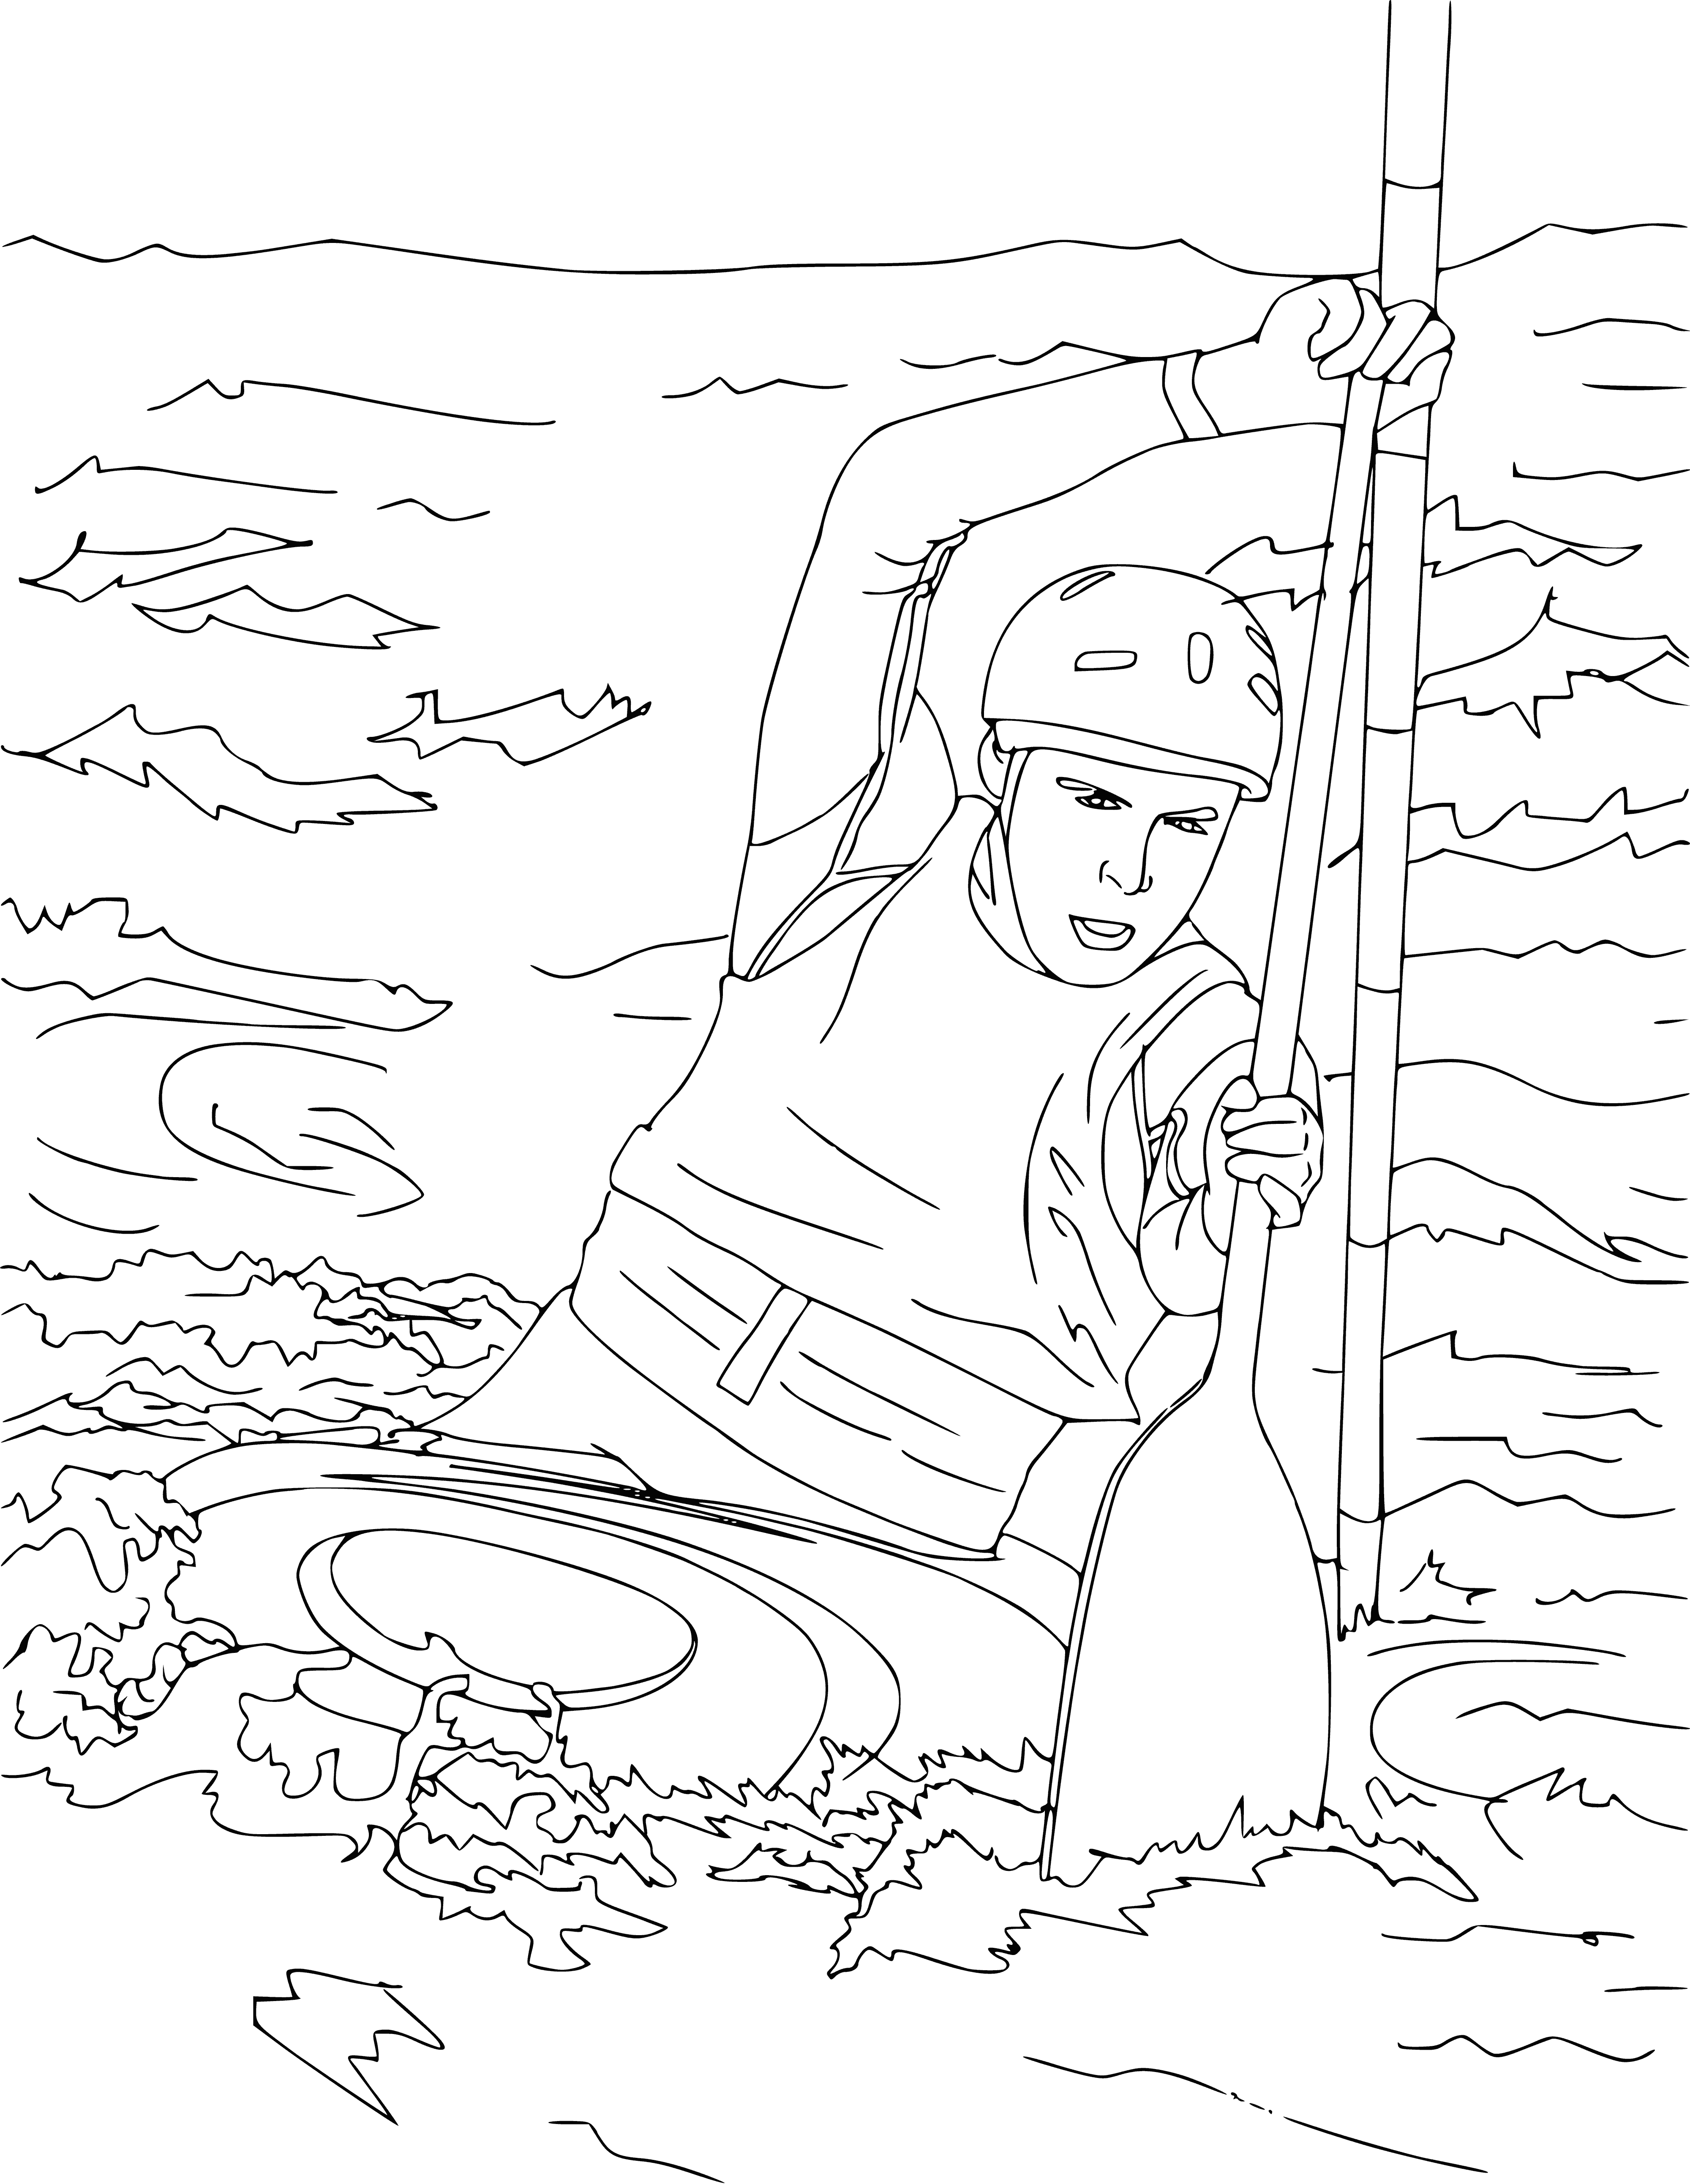 coloring page: Man canoeing on a lake, wearing life jacket, with paddle in hand. Calm & blue sky.